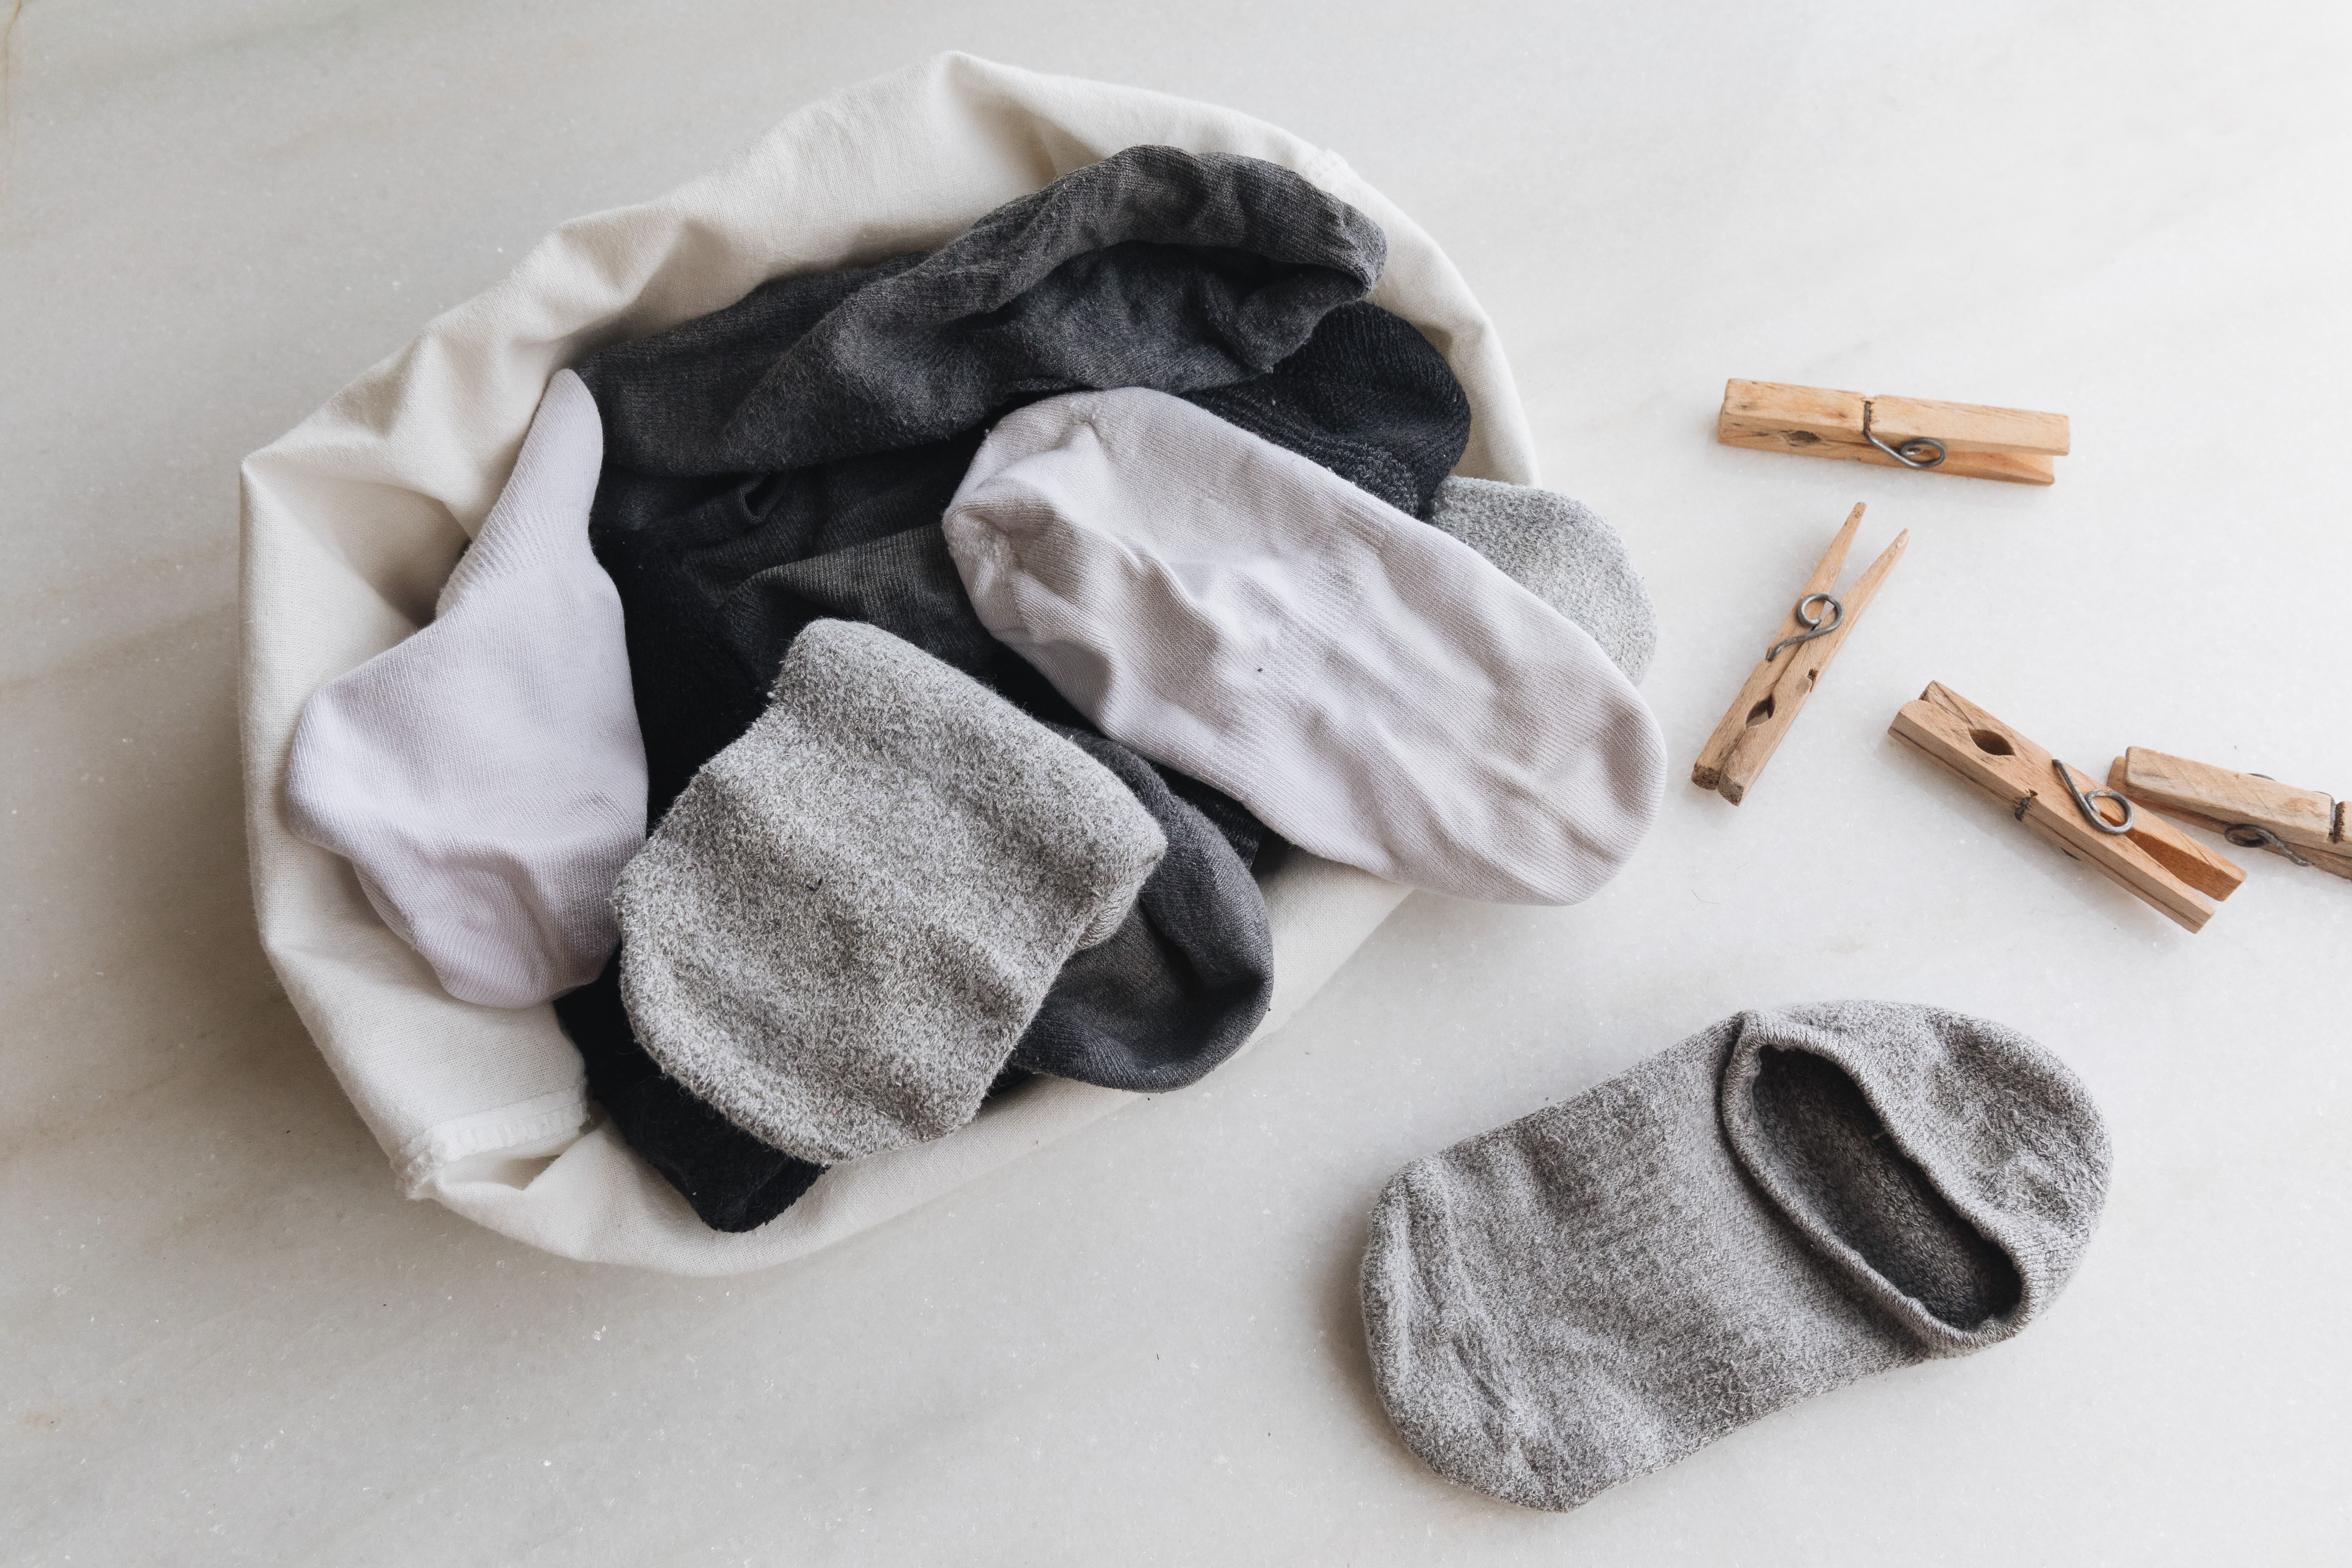 7 Laundry Hacks That Actually Work